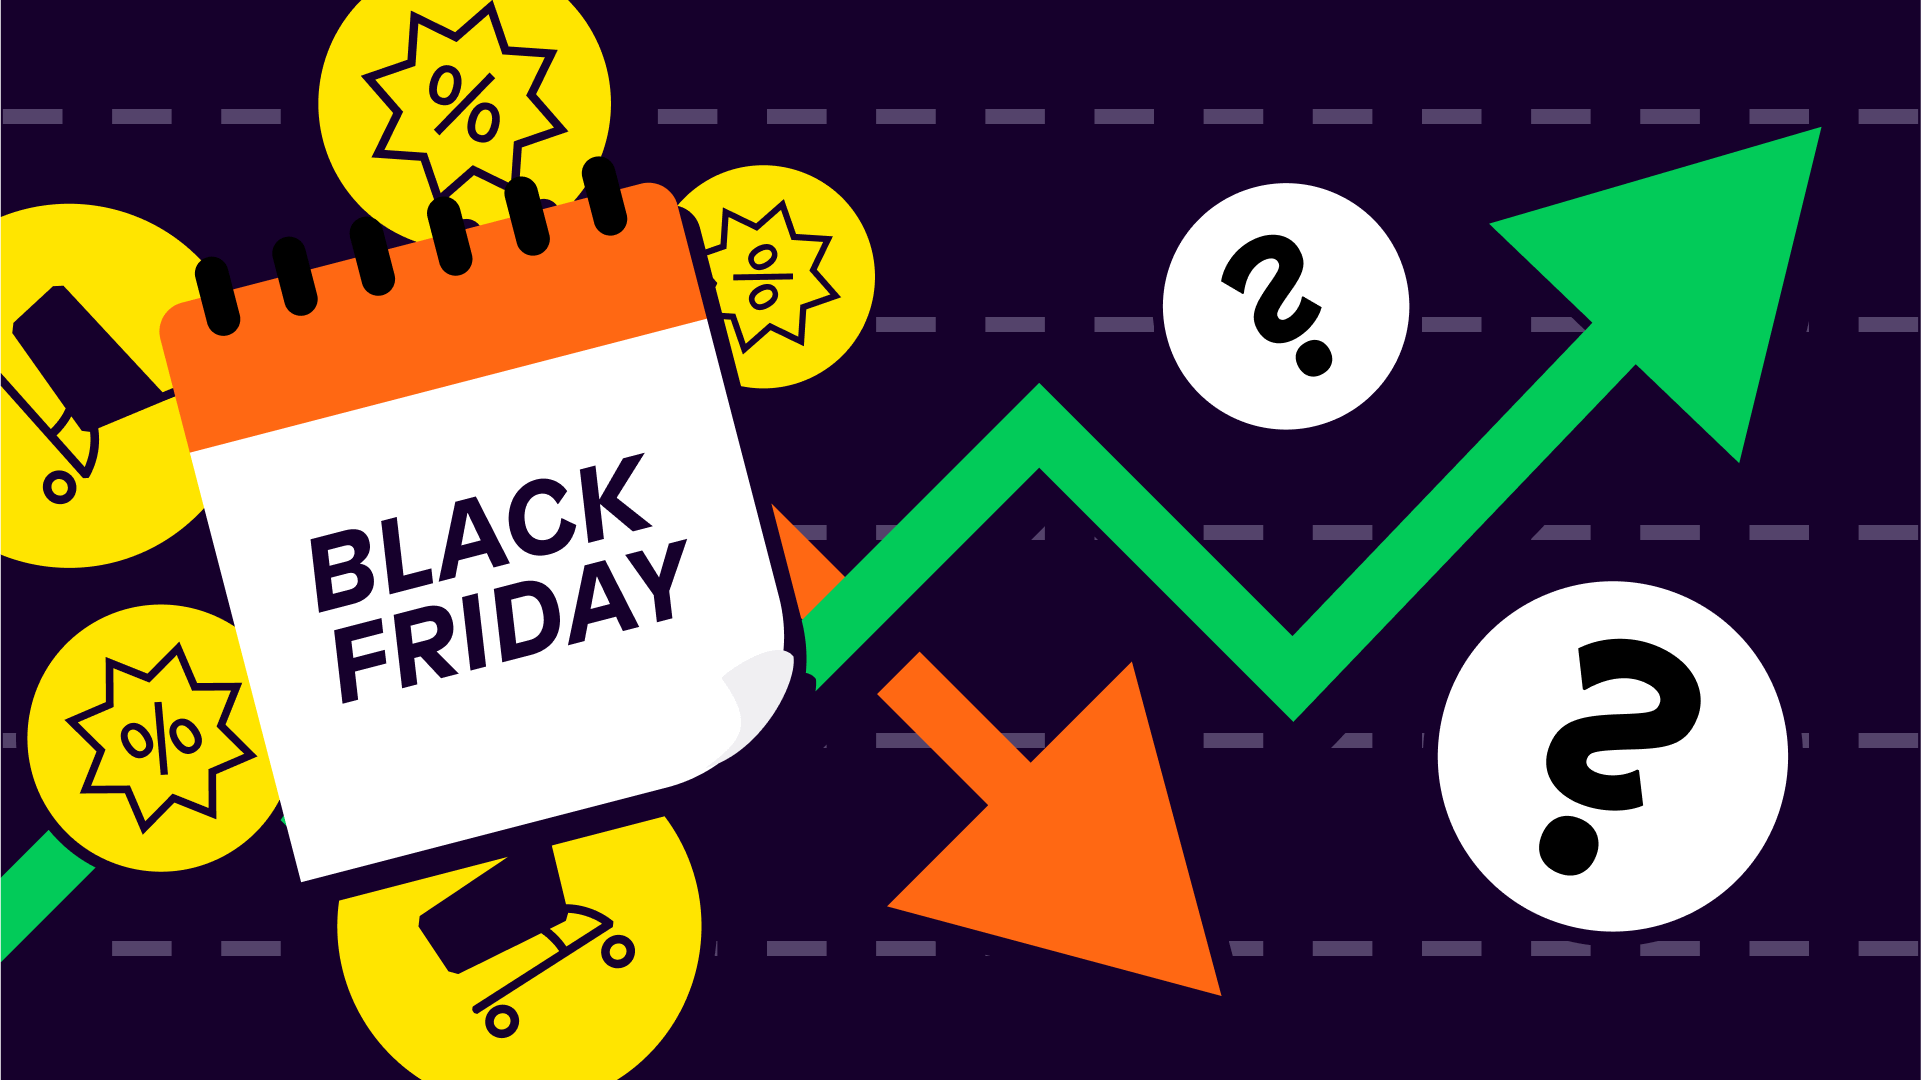 How does Black Friday affect the stock market?